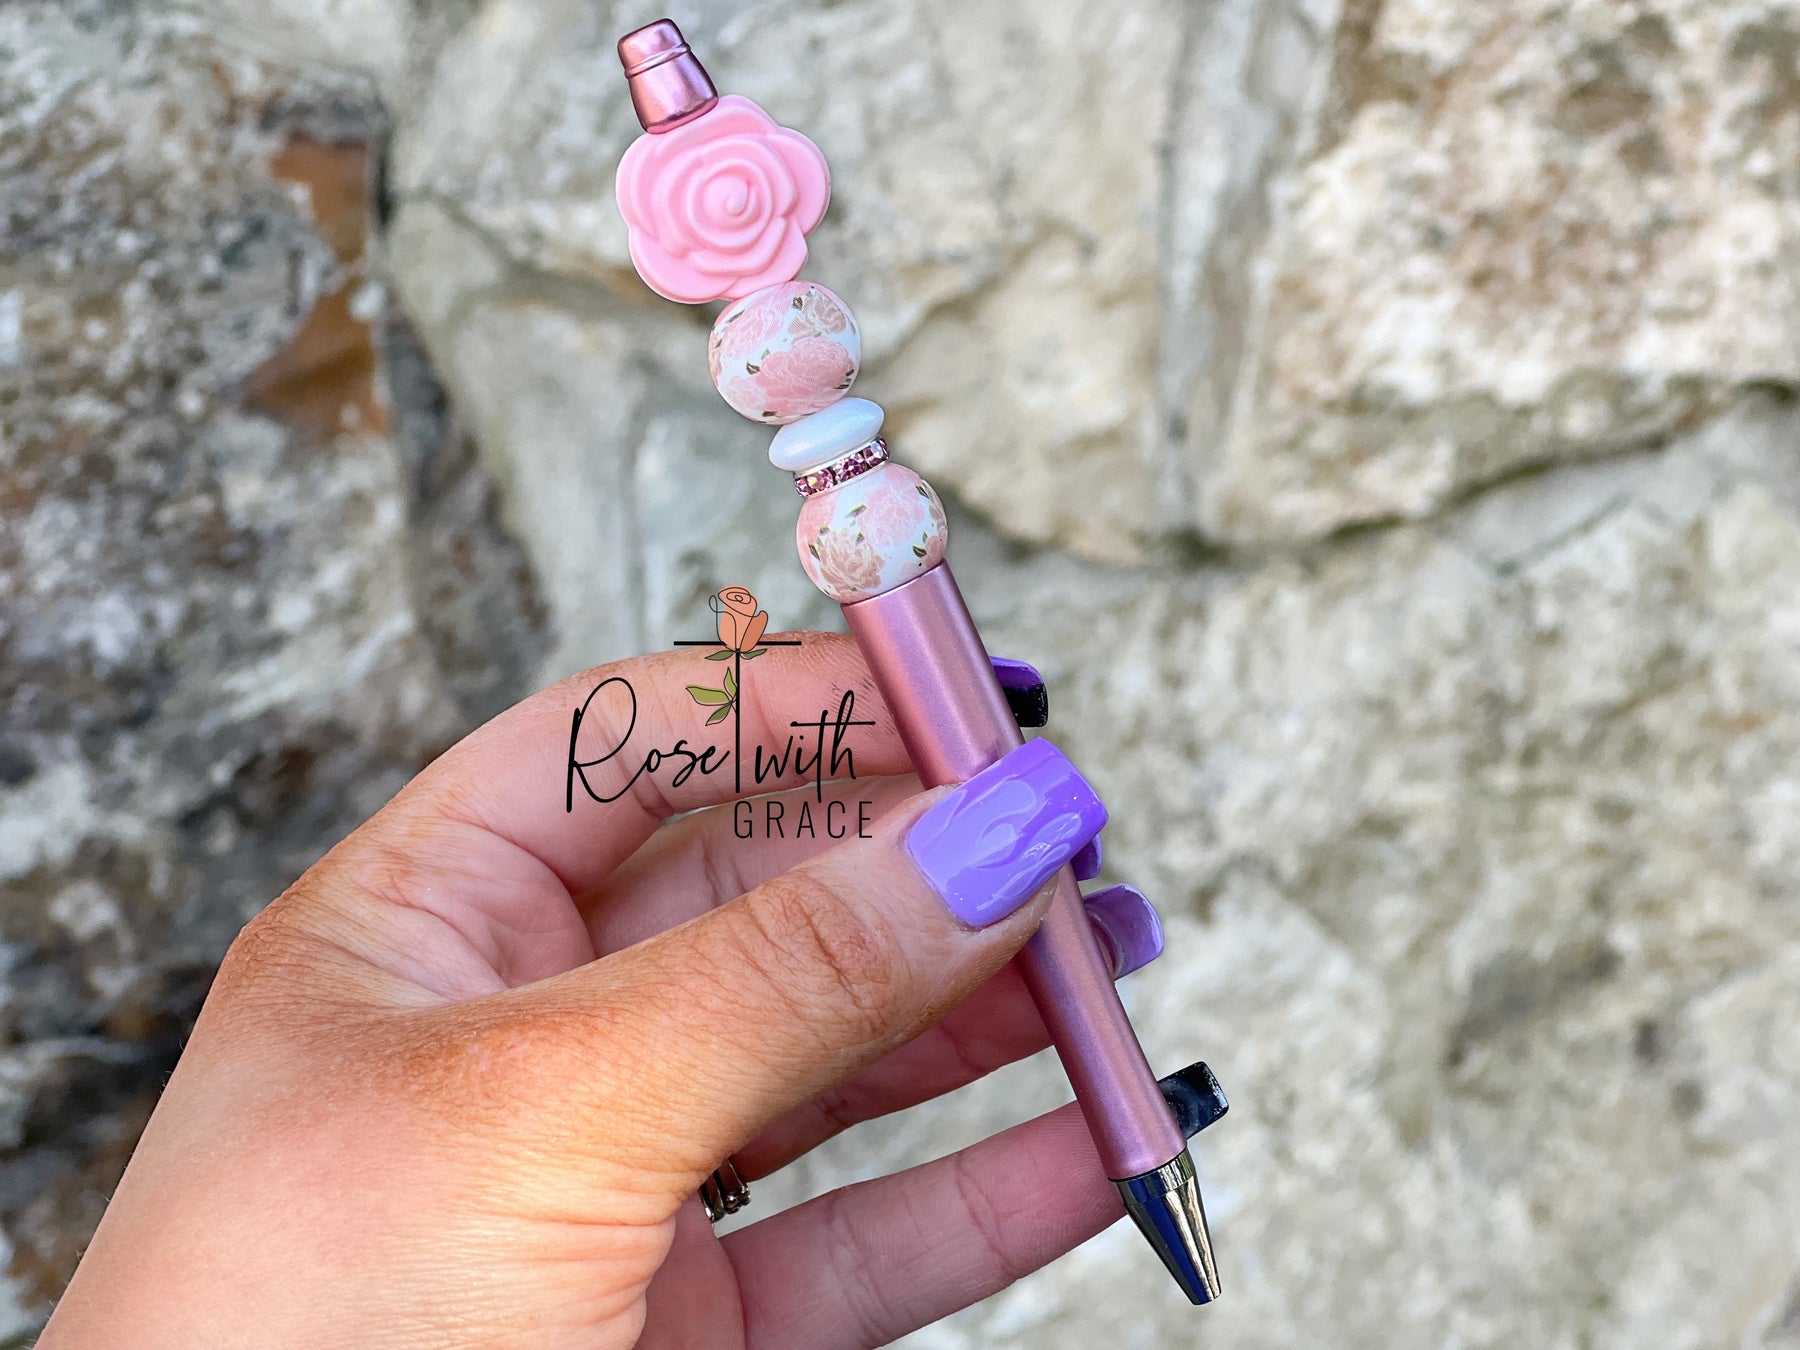 Sweet Evie Rose Pen Rose with Grace LLC